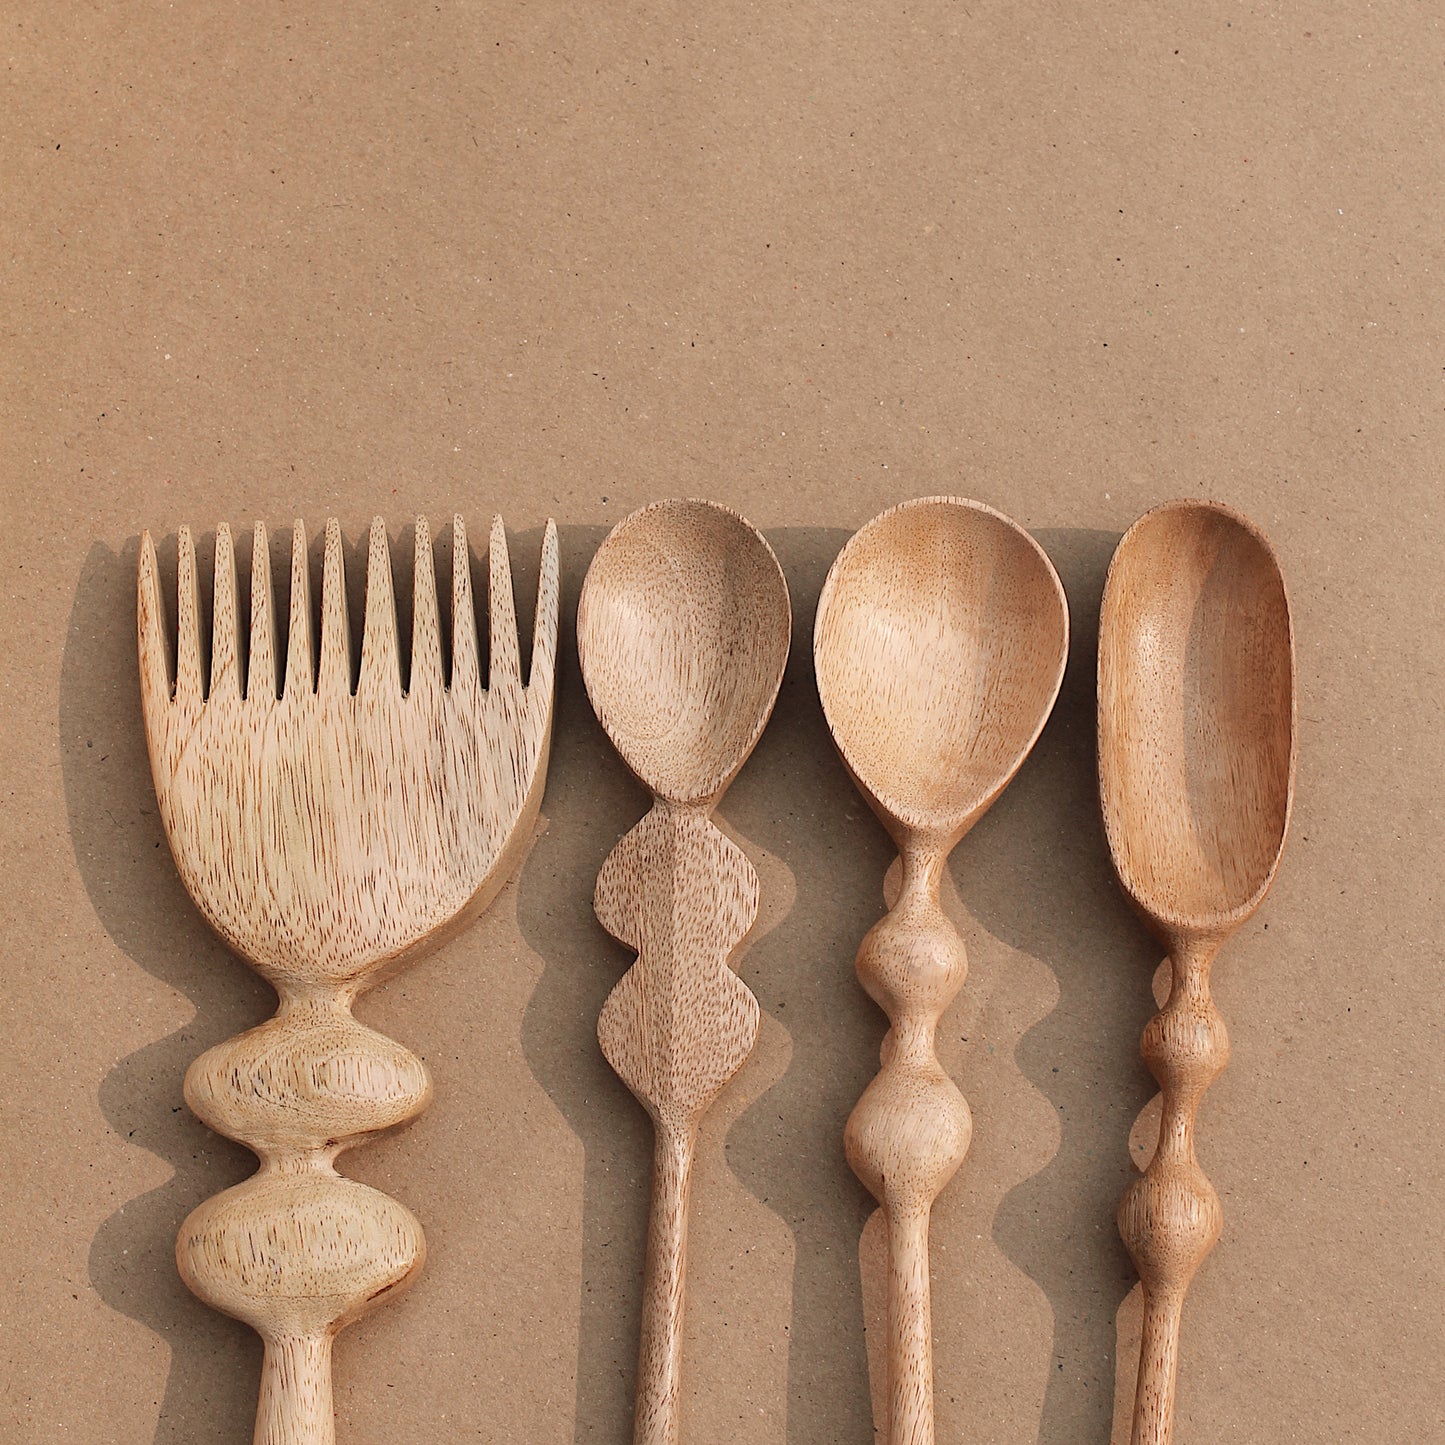 Artisans have infused these hand carved salad servers with love and creativity, featuring groovy handles for a fun and easy grip. Handmade in India.